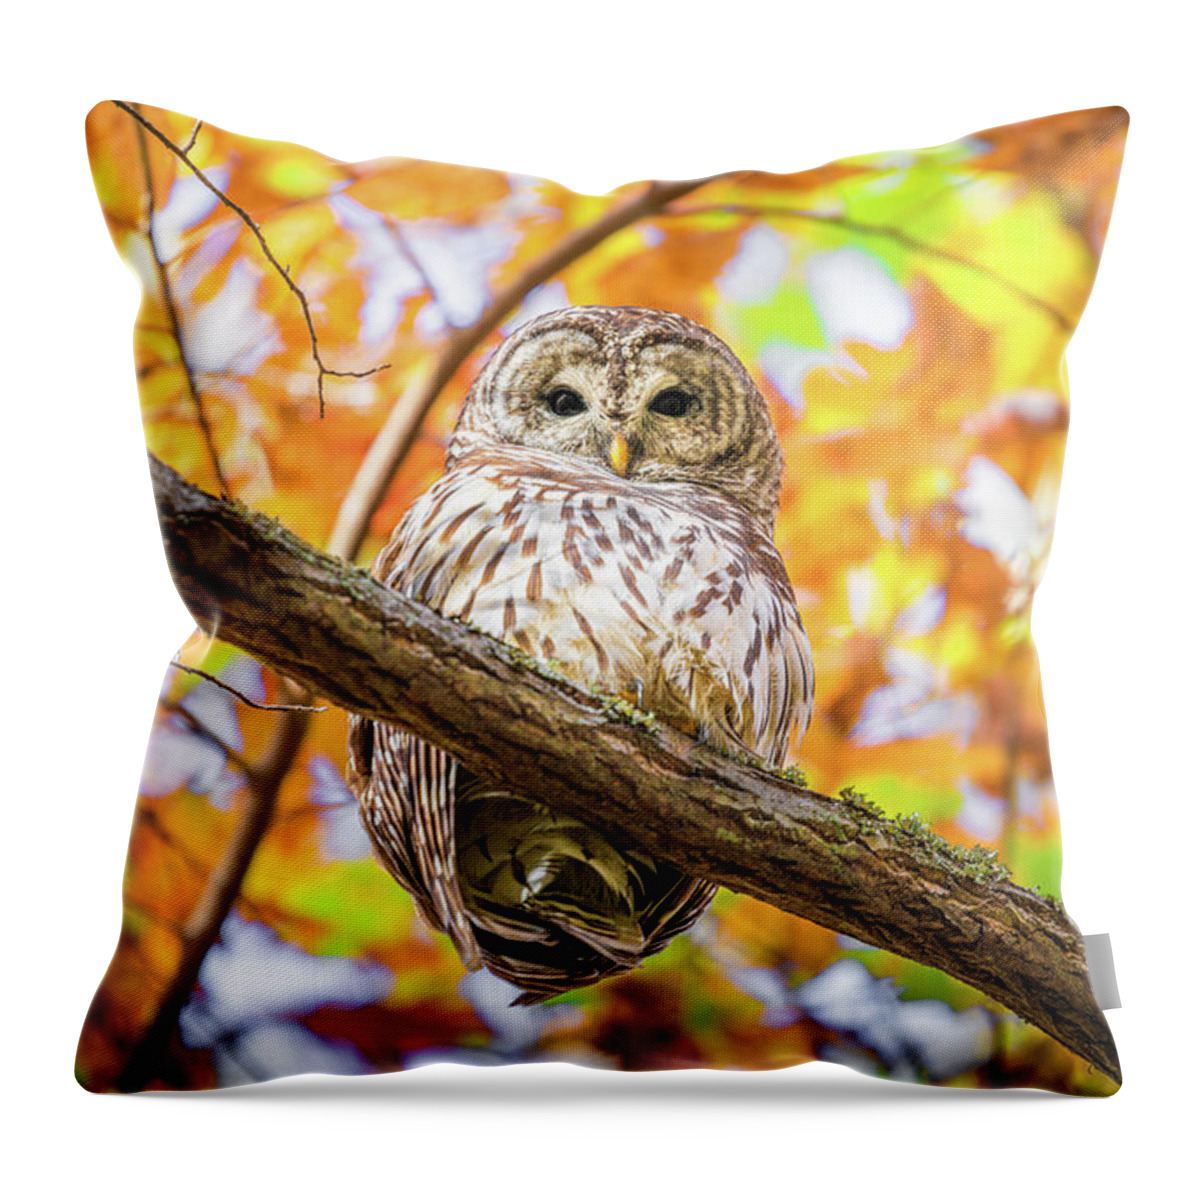 Barred Owl Throw Pillow featuring the photograph I See You by Jordan Hill